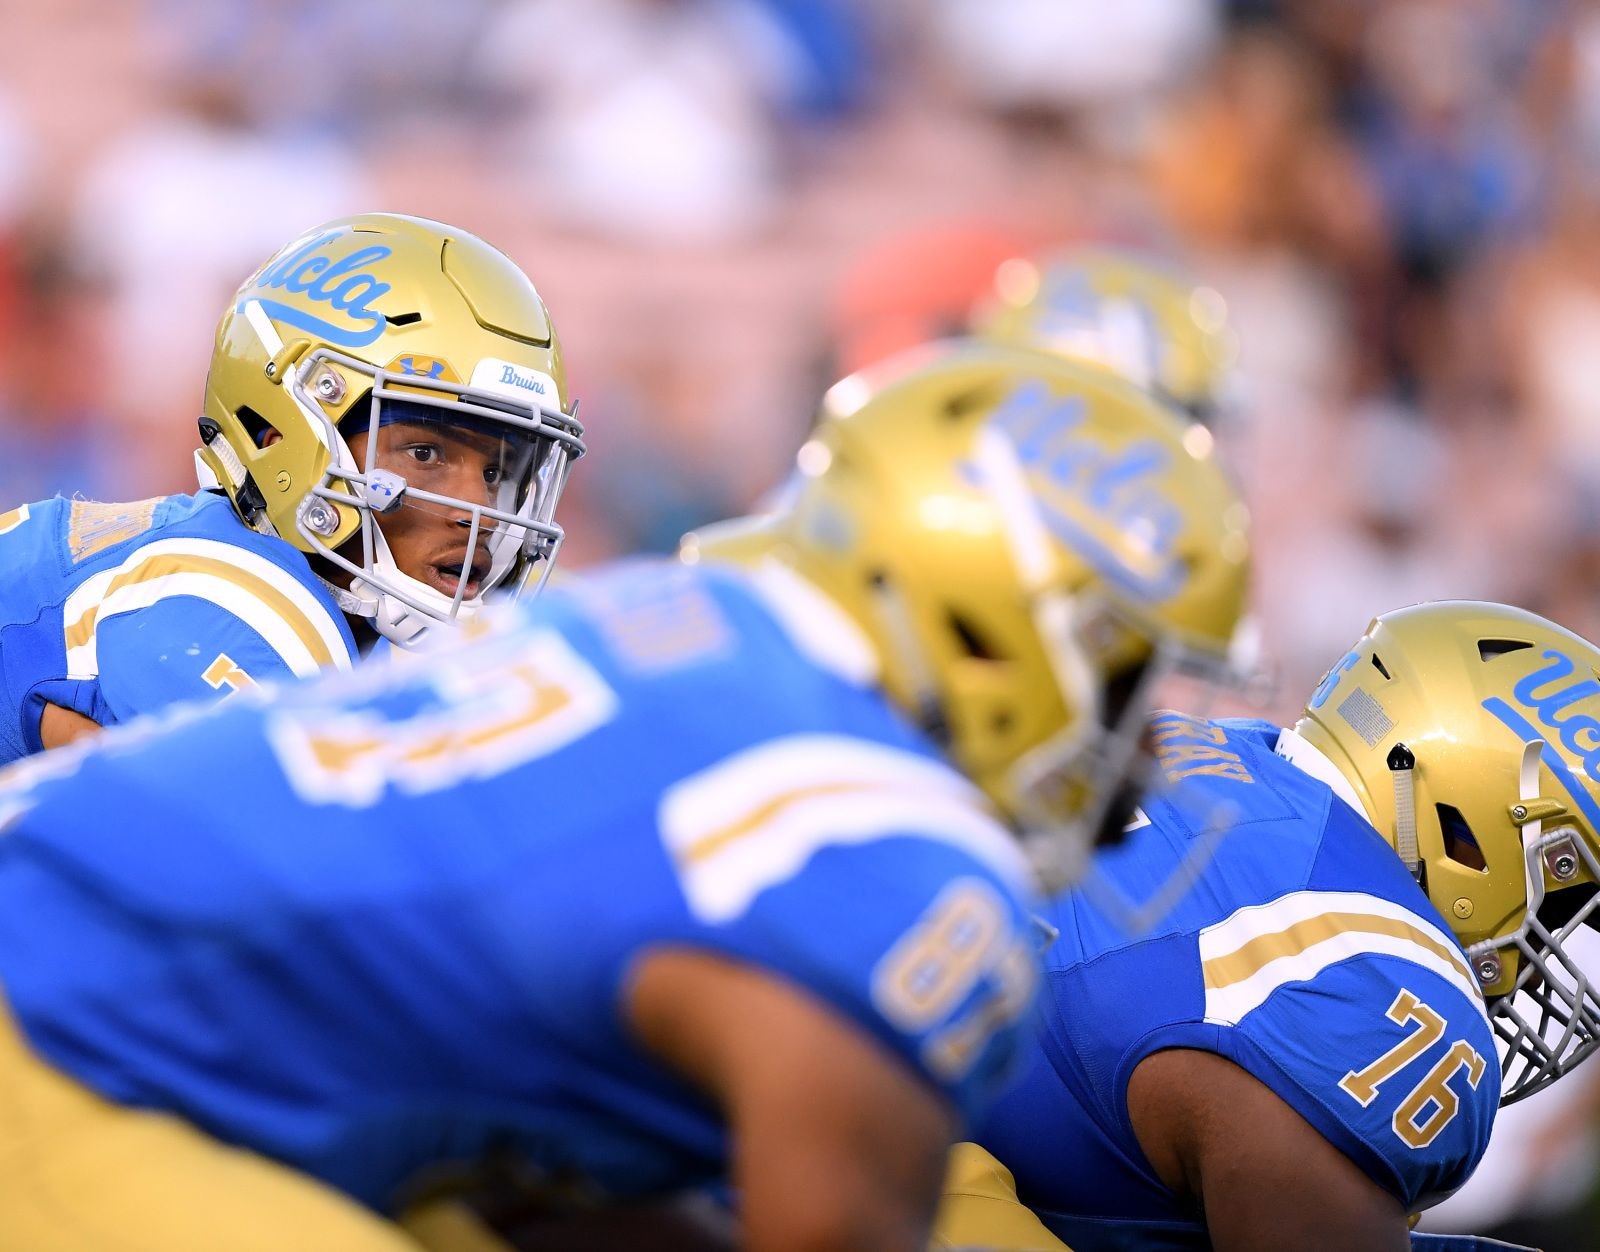 UCLA Football 2019 PostSpring Game Projected Depth Chart